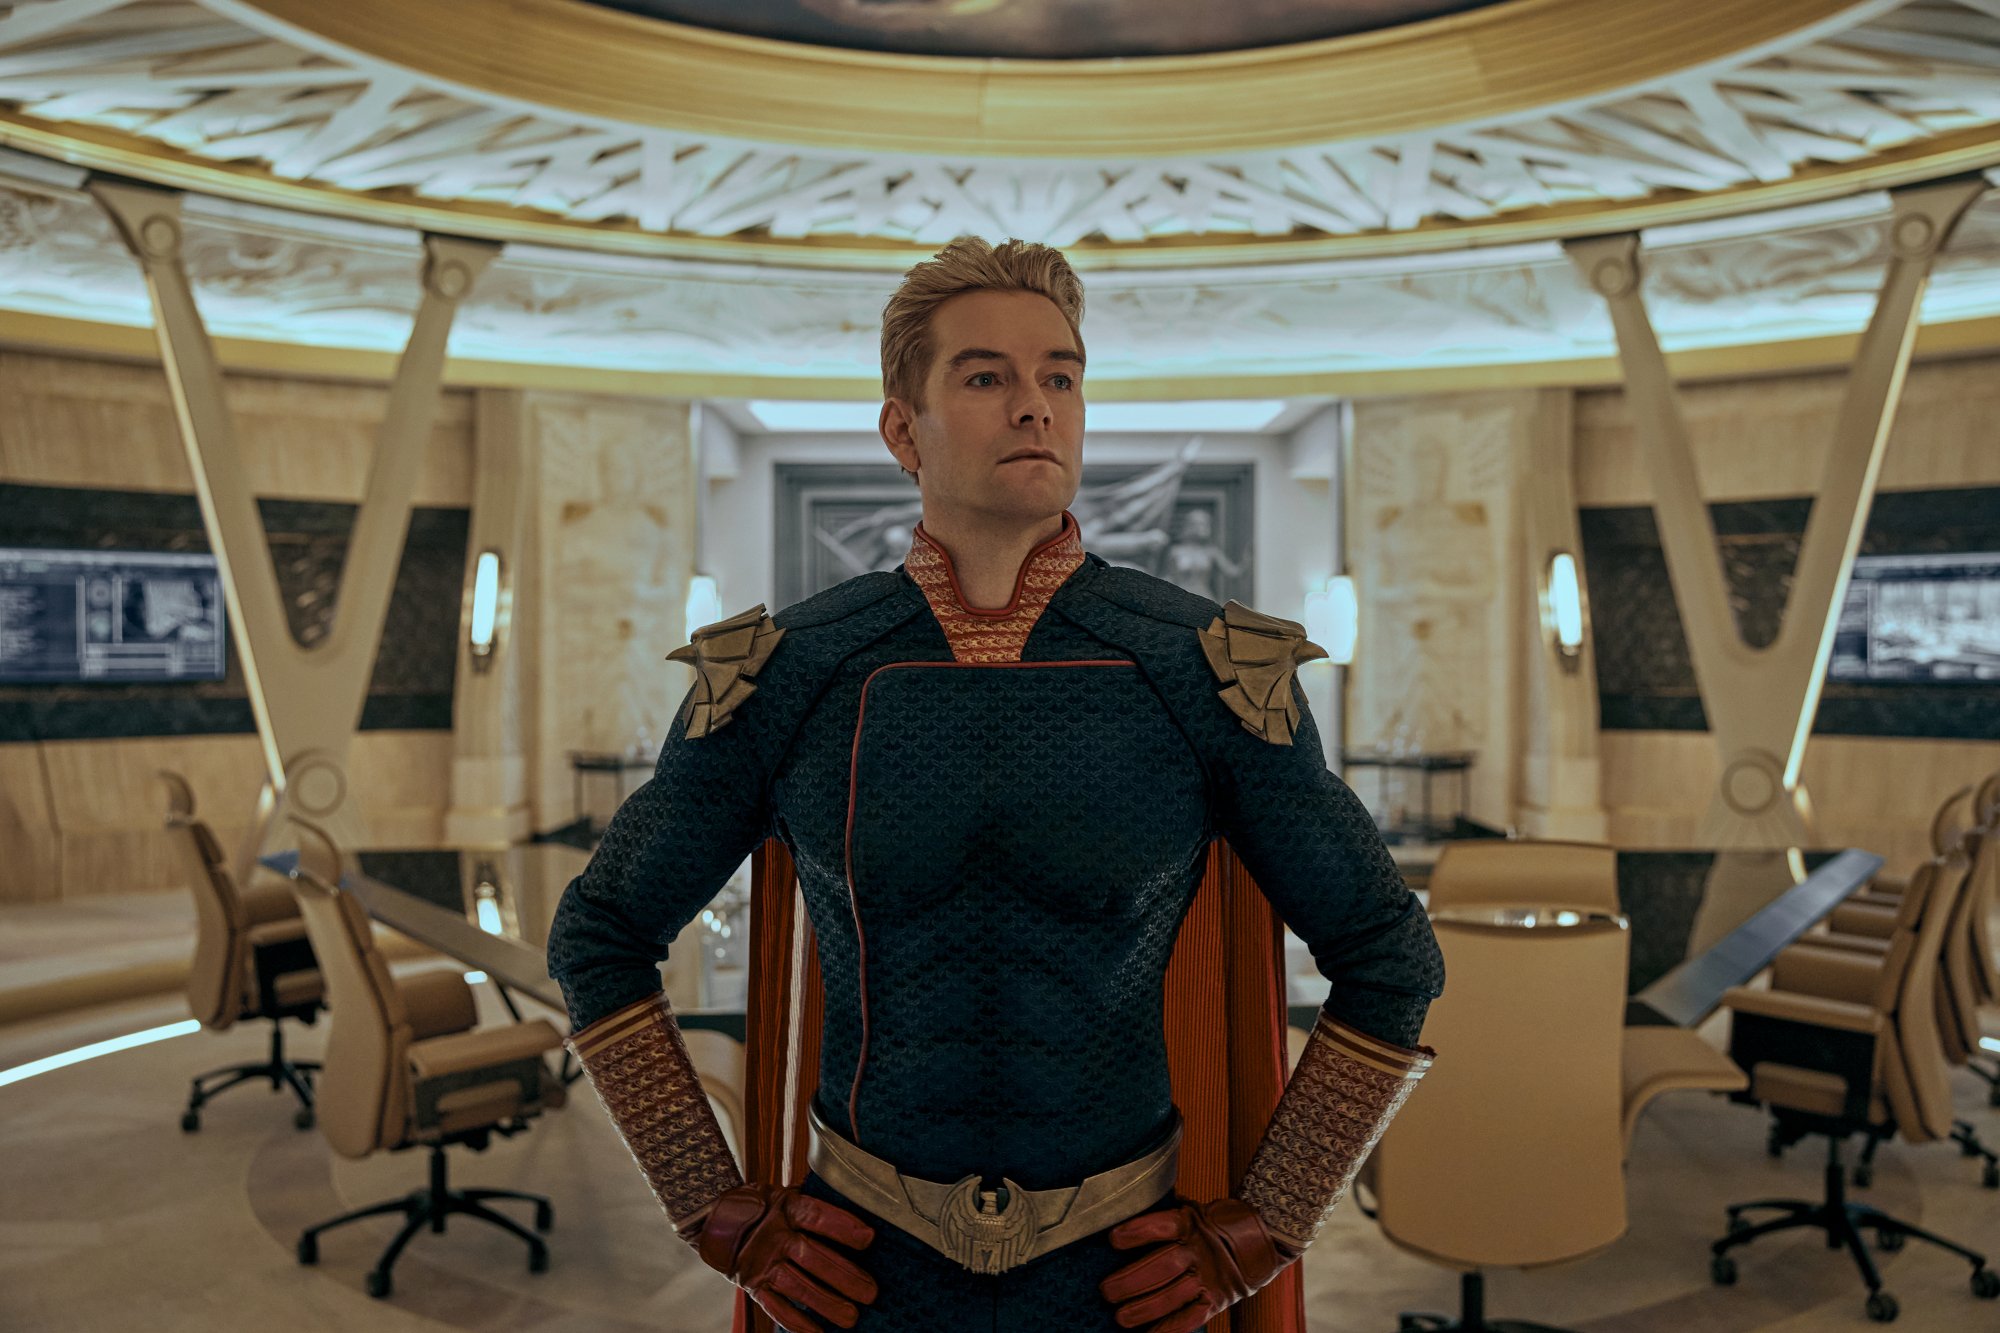 Antony Starr as Homelander in 'The Boys' Season 3, which had an action-packed ending. He's standing in front of an empty conference room with his hands on his hips.